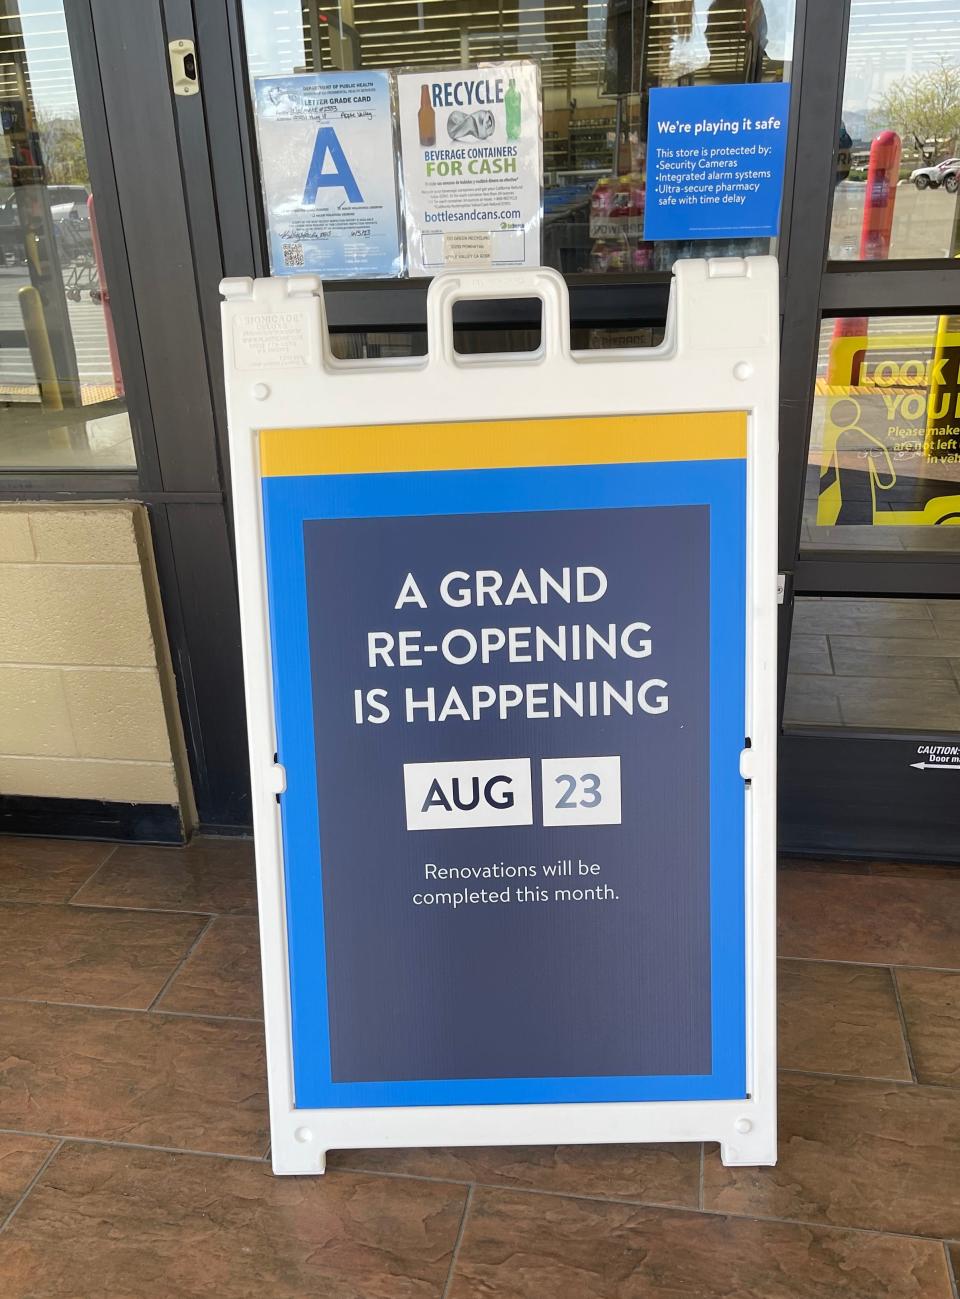 Walmart officials announced that a major remodeling project has begun at the Walmart at 20251 Highway 18 in Apple Valley. The store is scheduled to celebrate completion of the project in August.